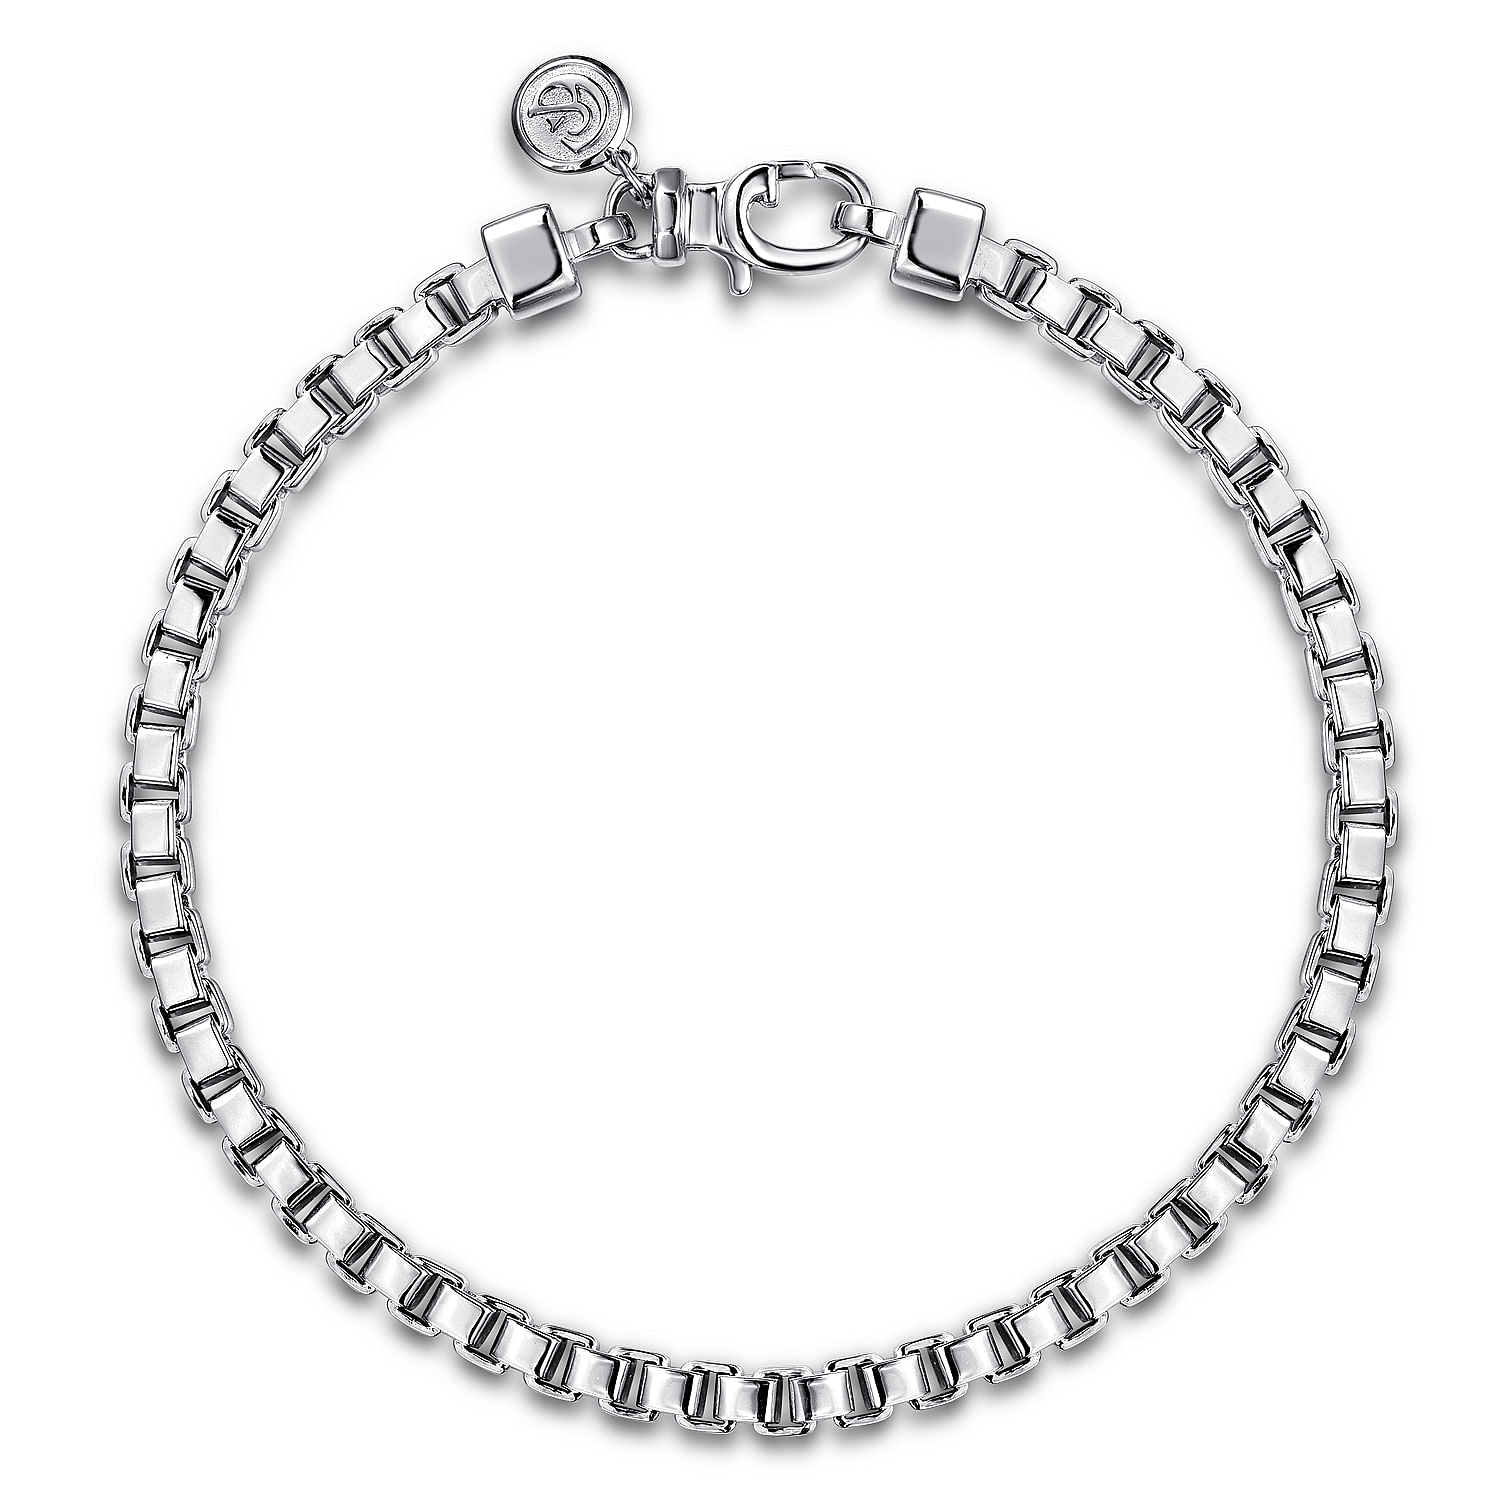 4.0mm 925 Sterling Silver Solid Mens Box Chain Bracelet